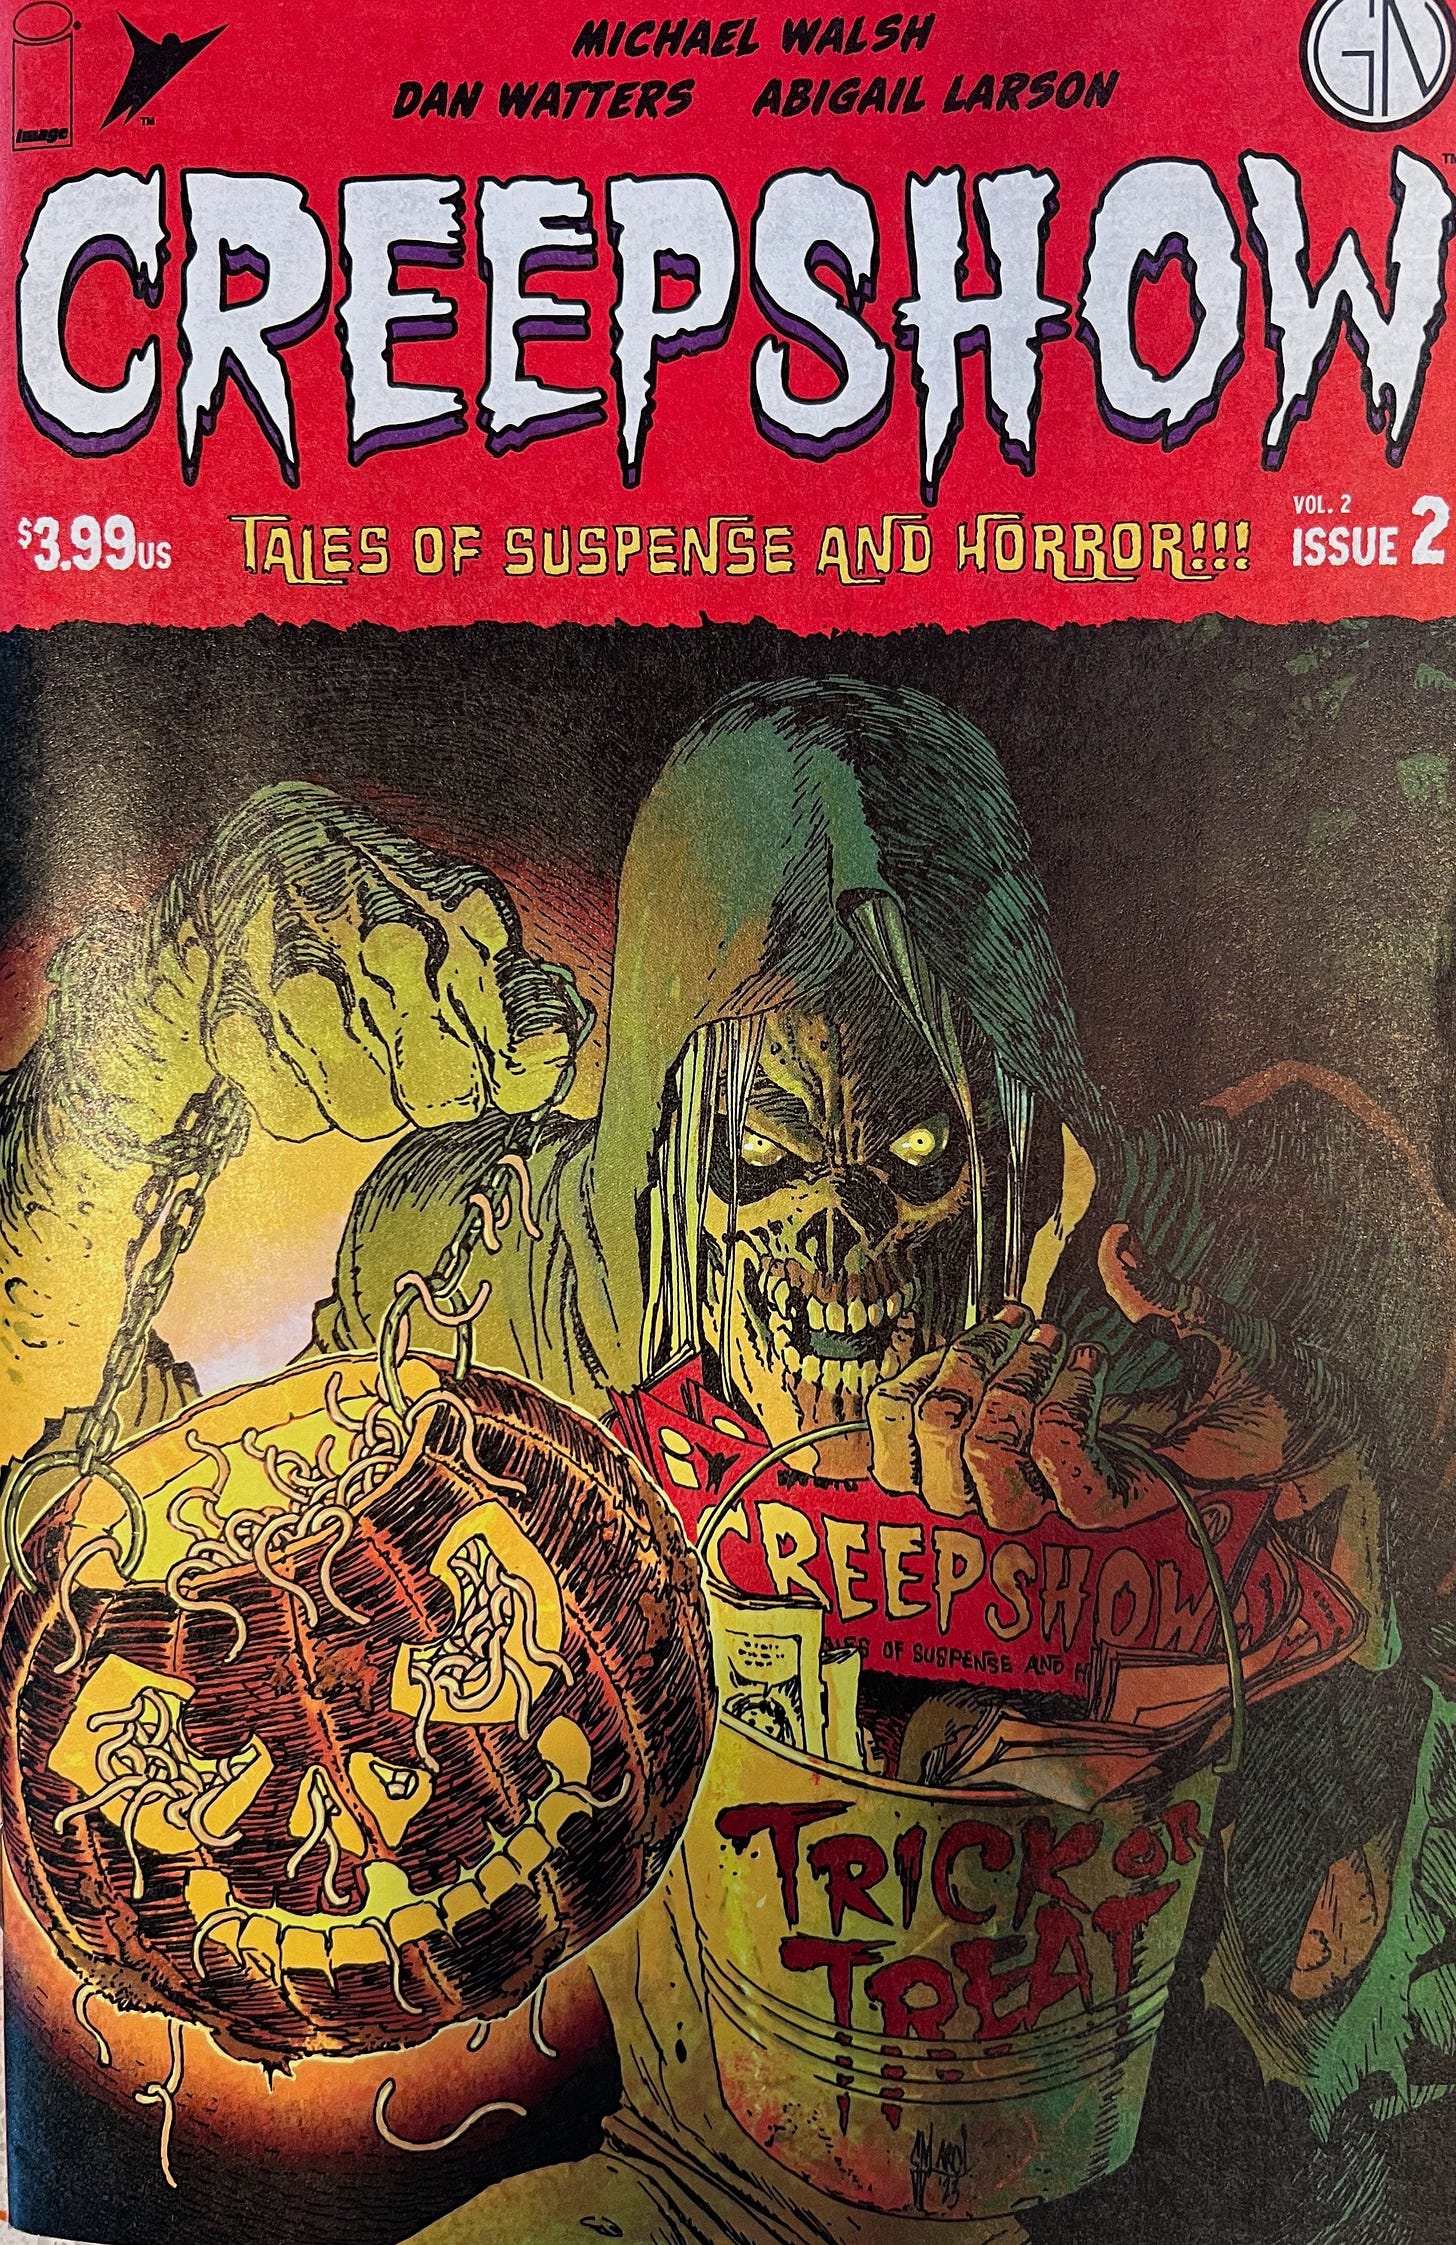 The cover of Creepshow issue two.